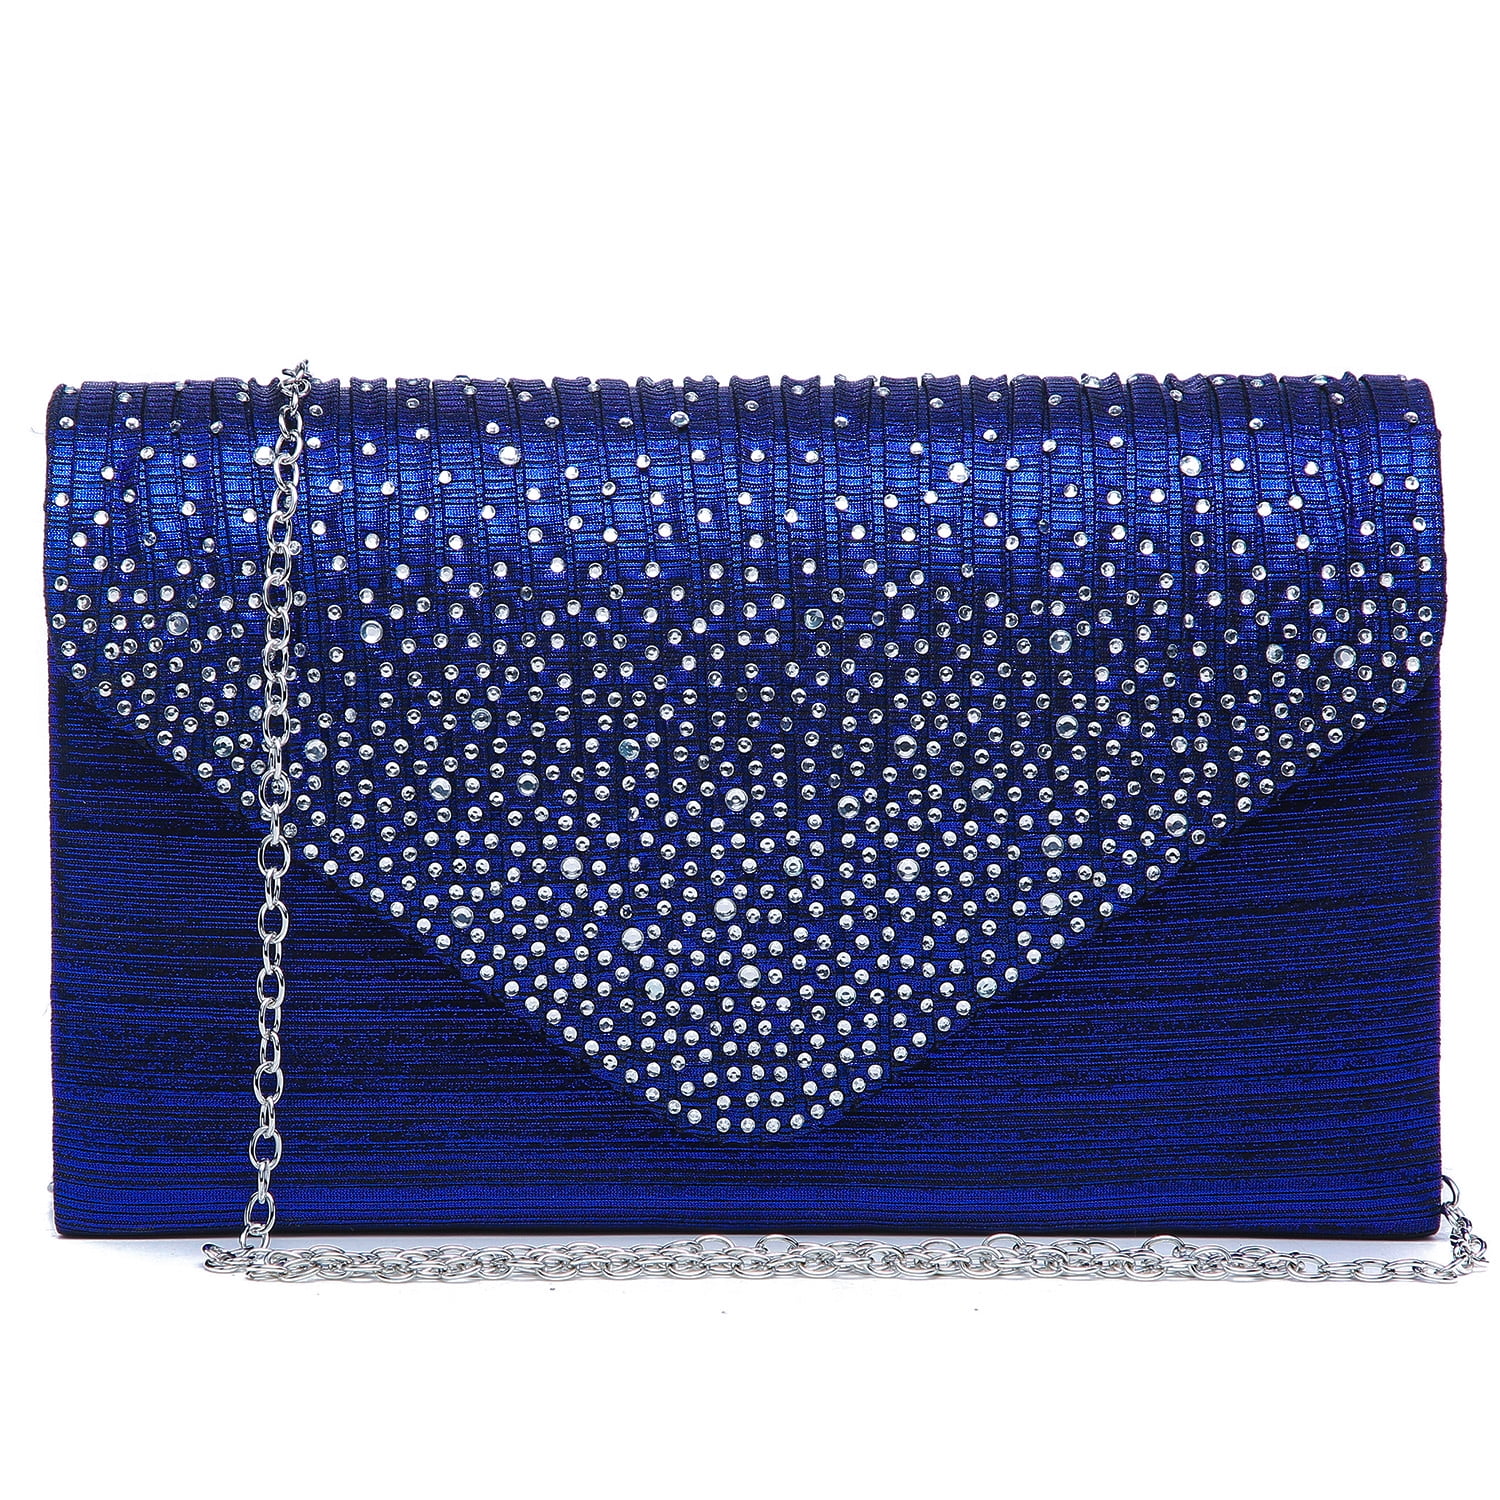 Blue and White Clutches Bags & Purses Handbags Clutches & Evening Bags 